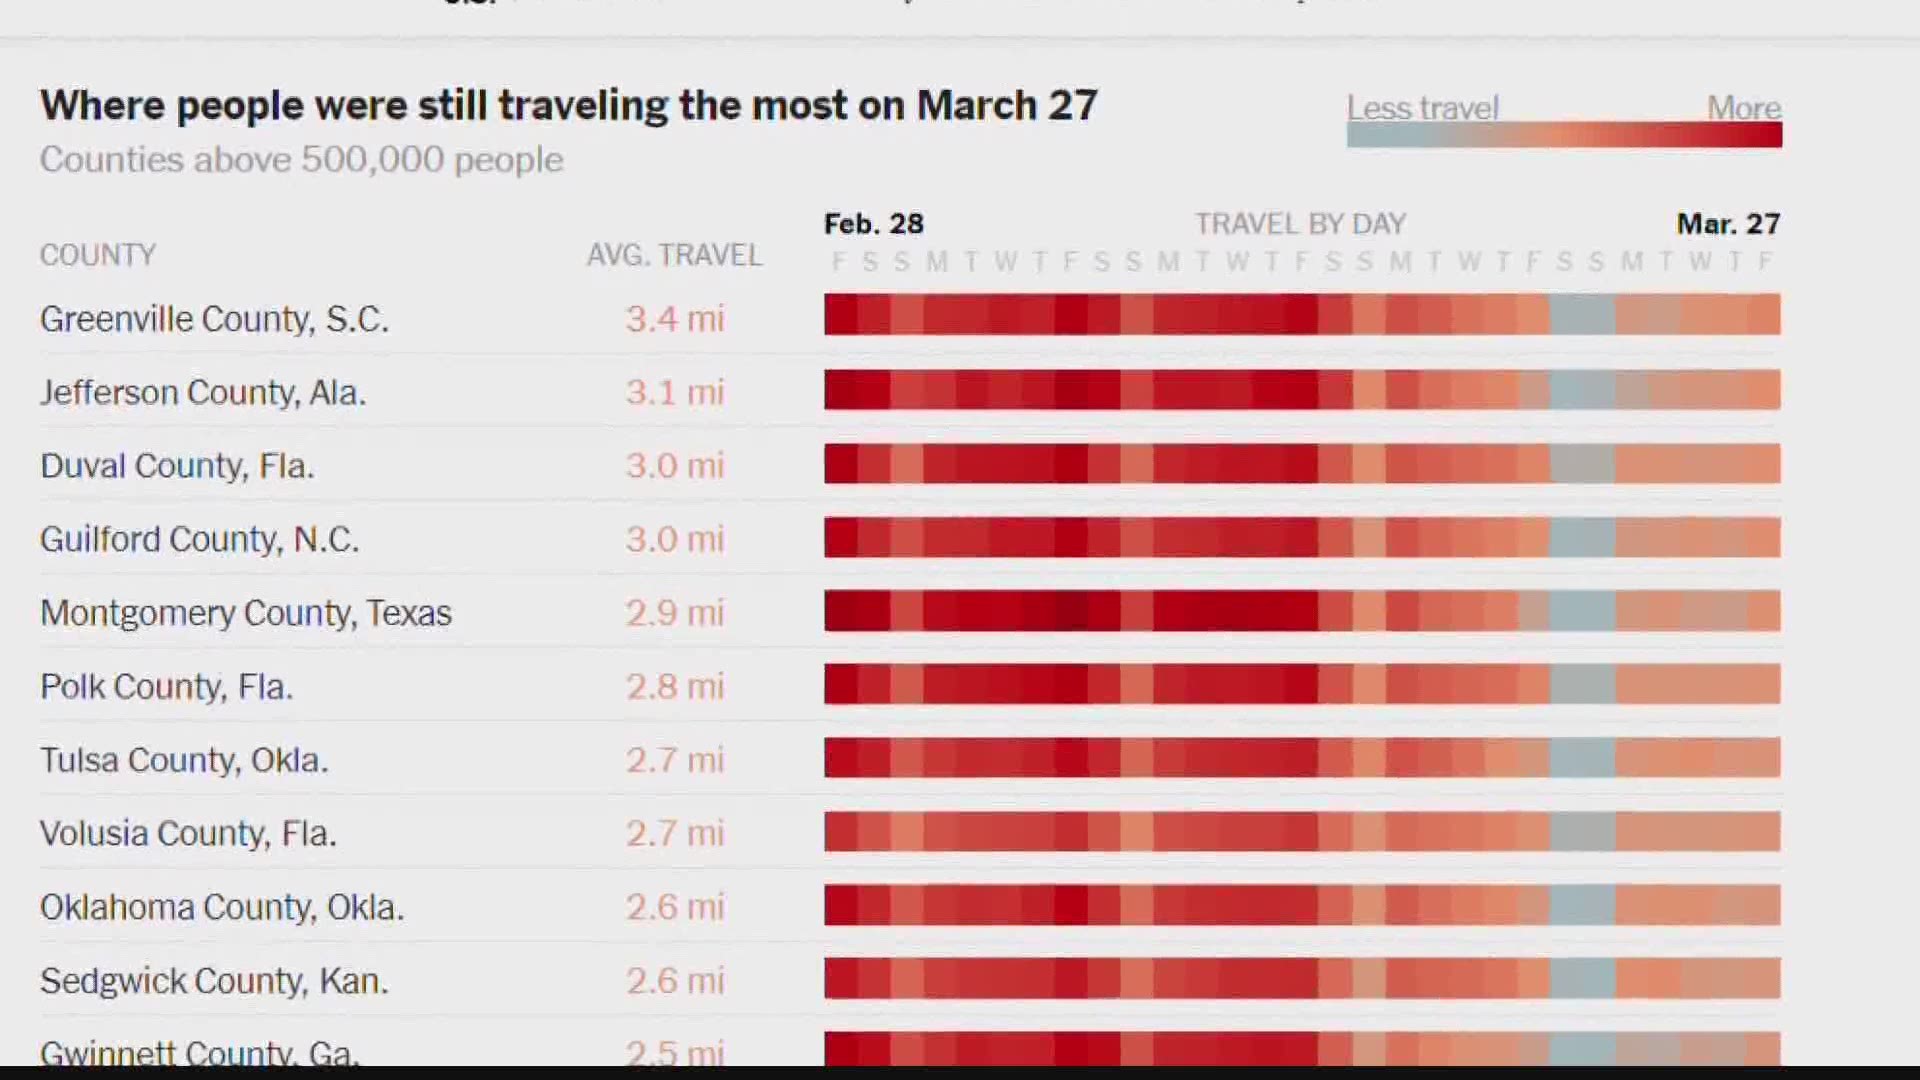 A New York Times article compiled data showing that people on average were traveling an average of three miles during March.